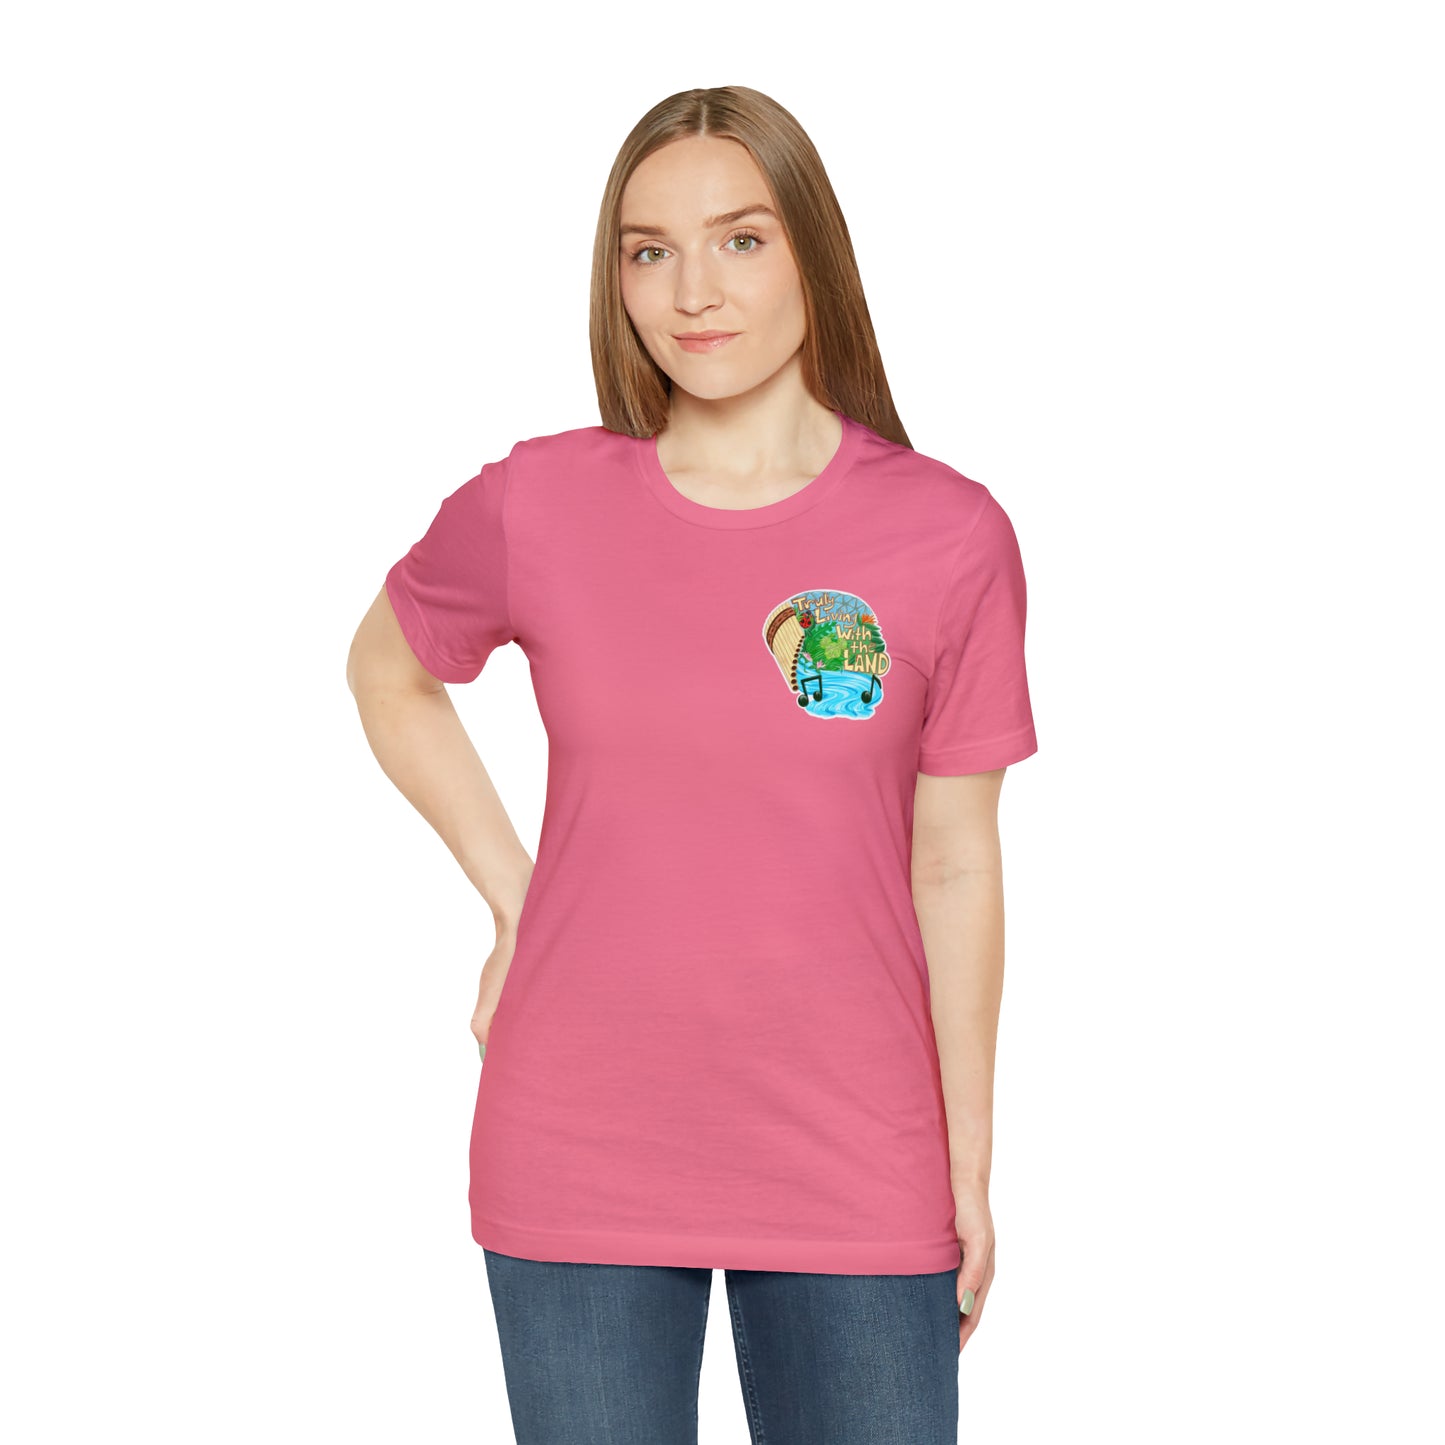 Truly Living with the Land Pink Women Shirt